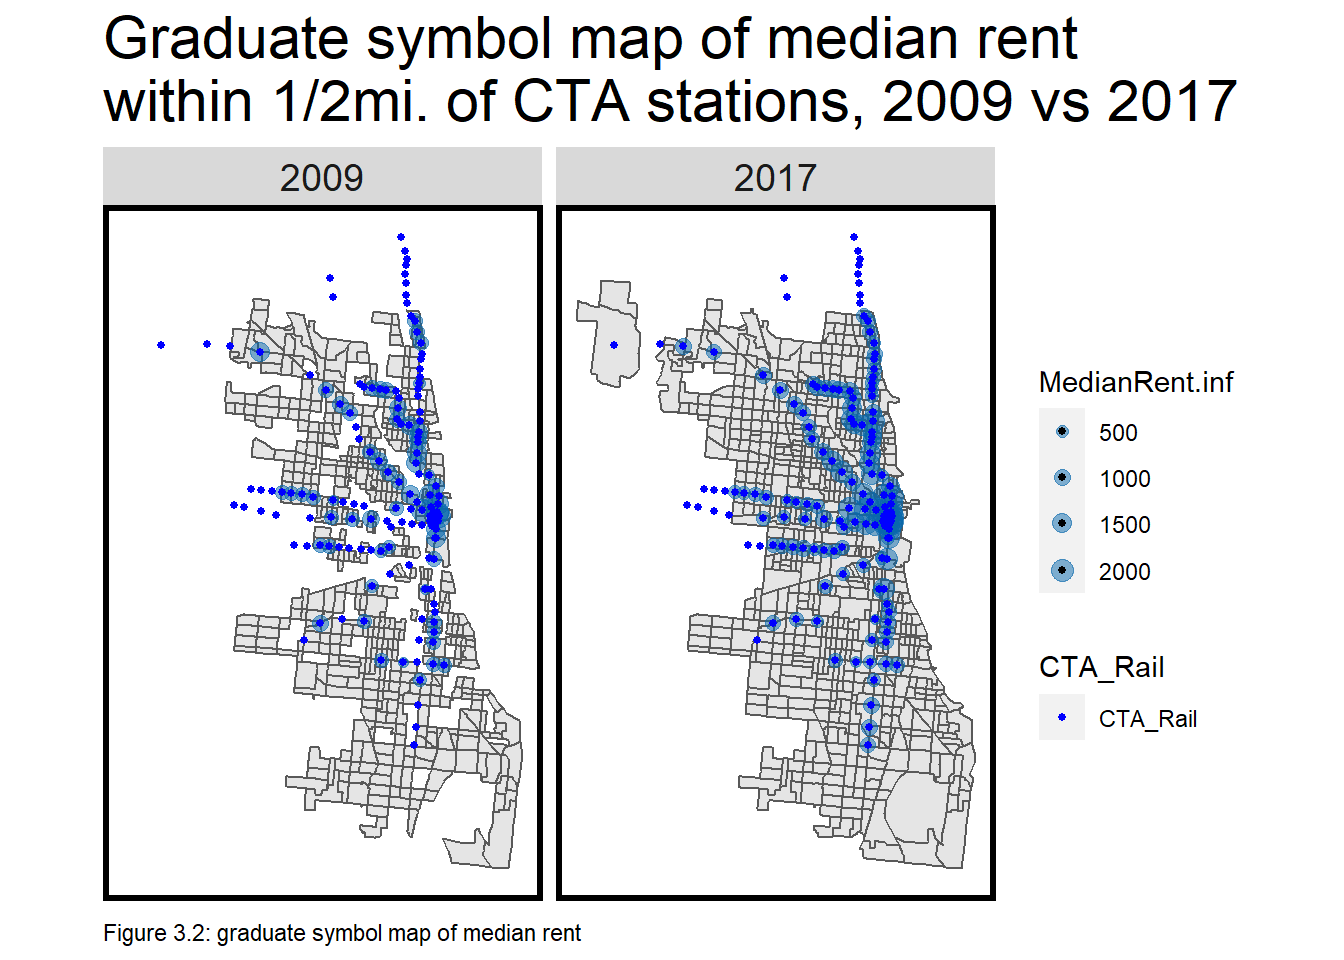 Graduate symbol map of median rent within 0.5mi. of CTA stations